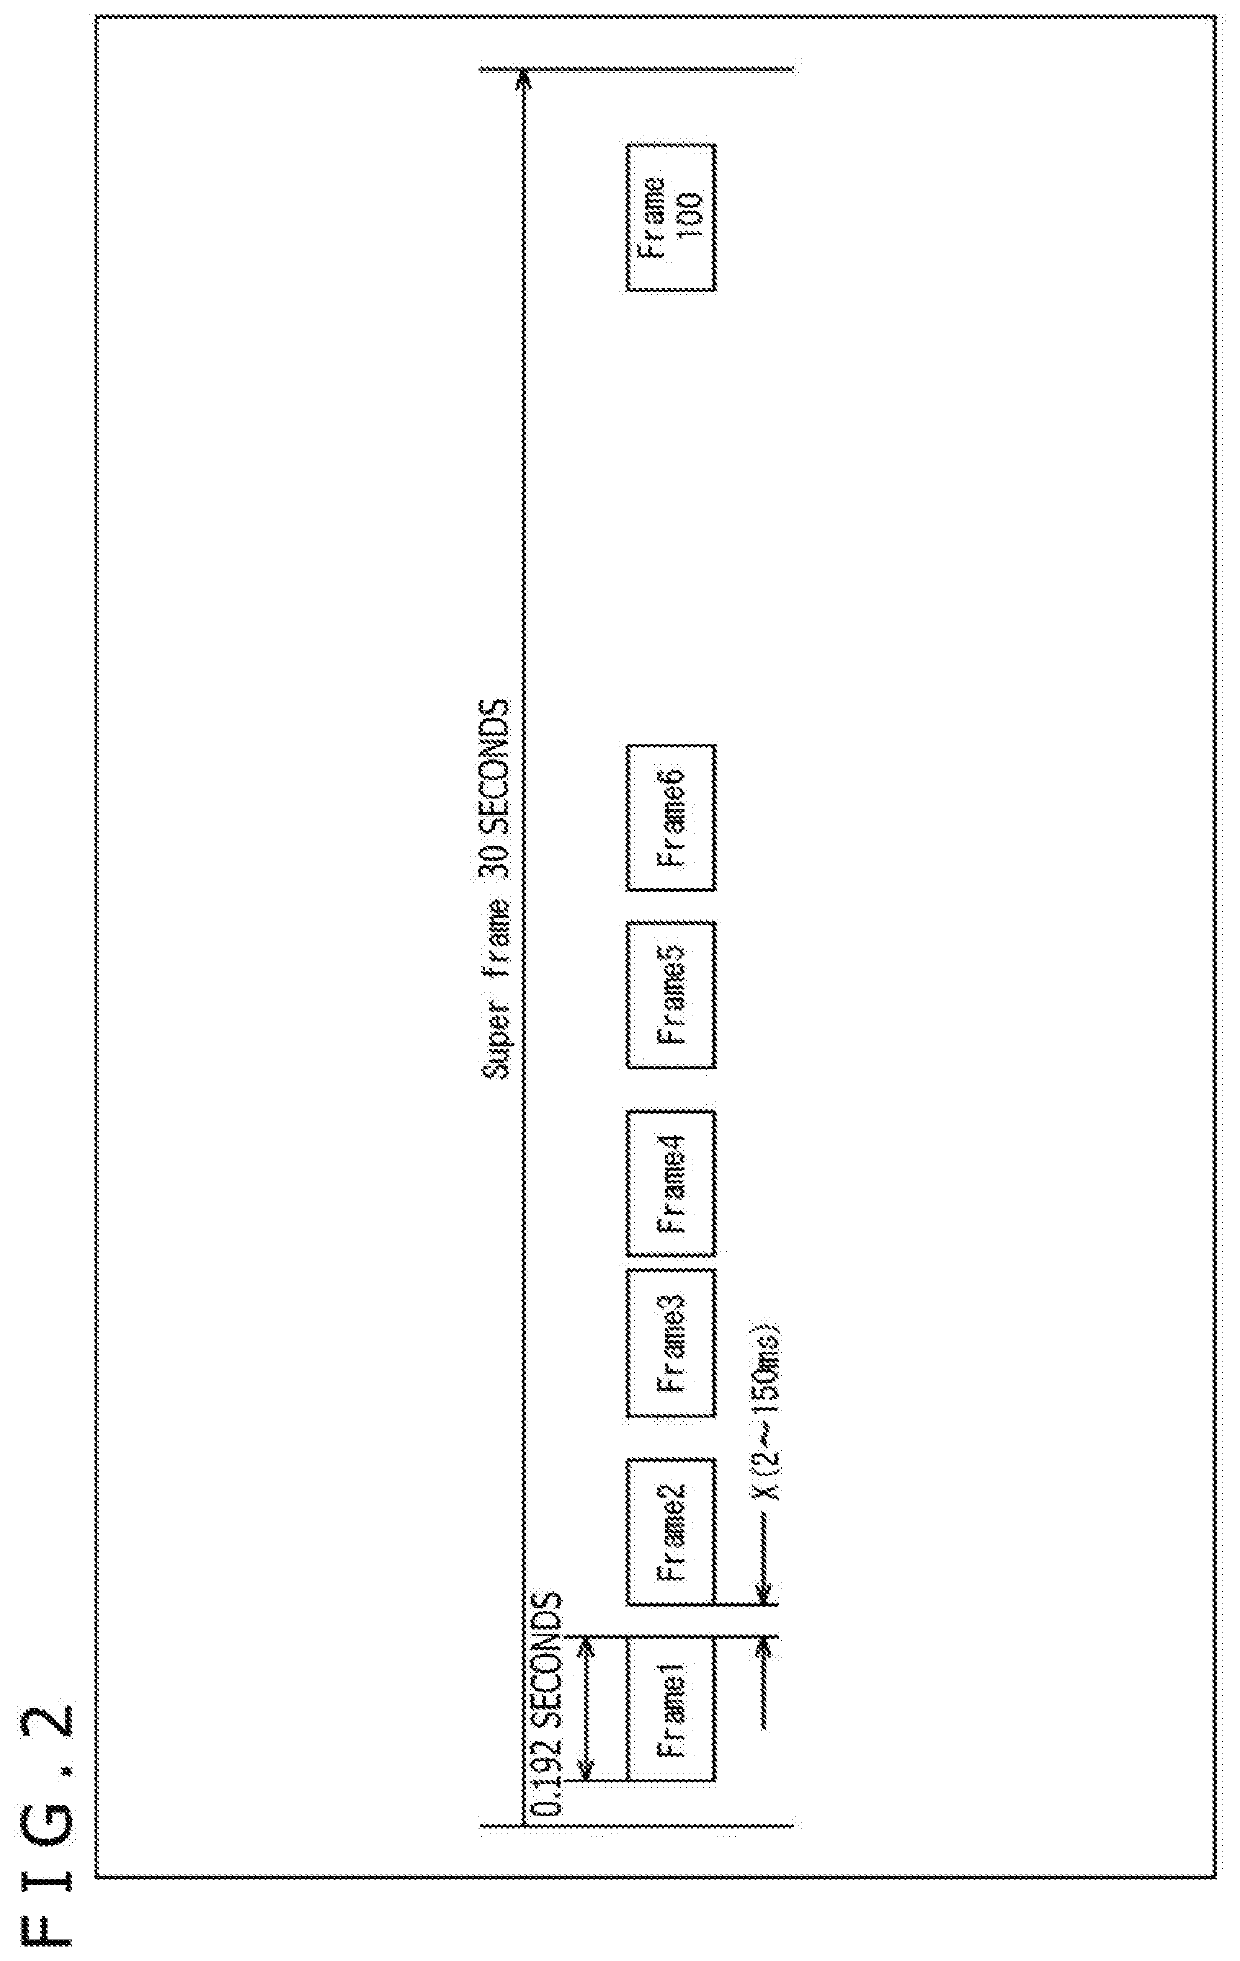 Signal processing apparatus and method